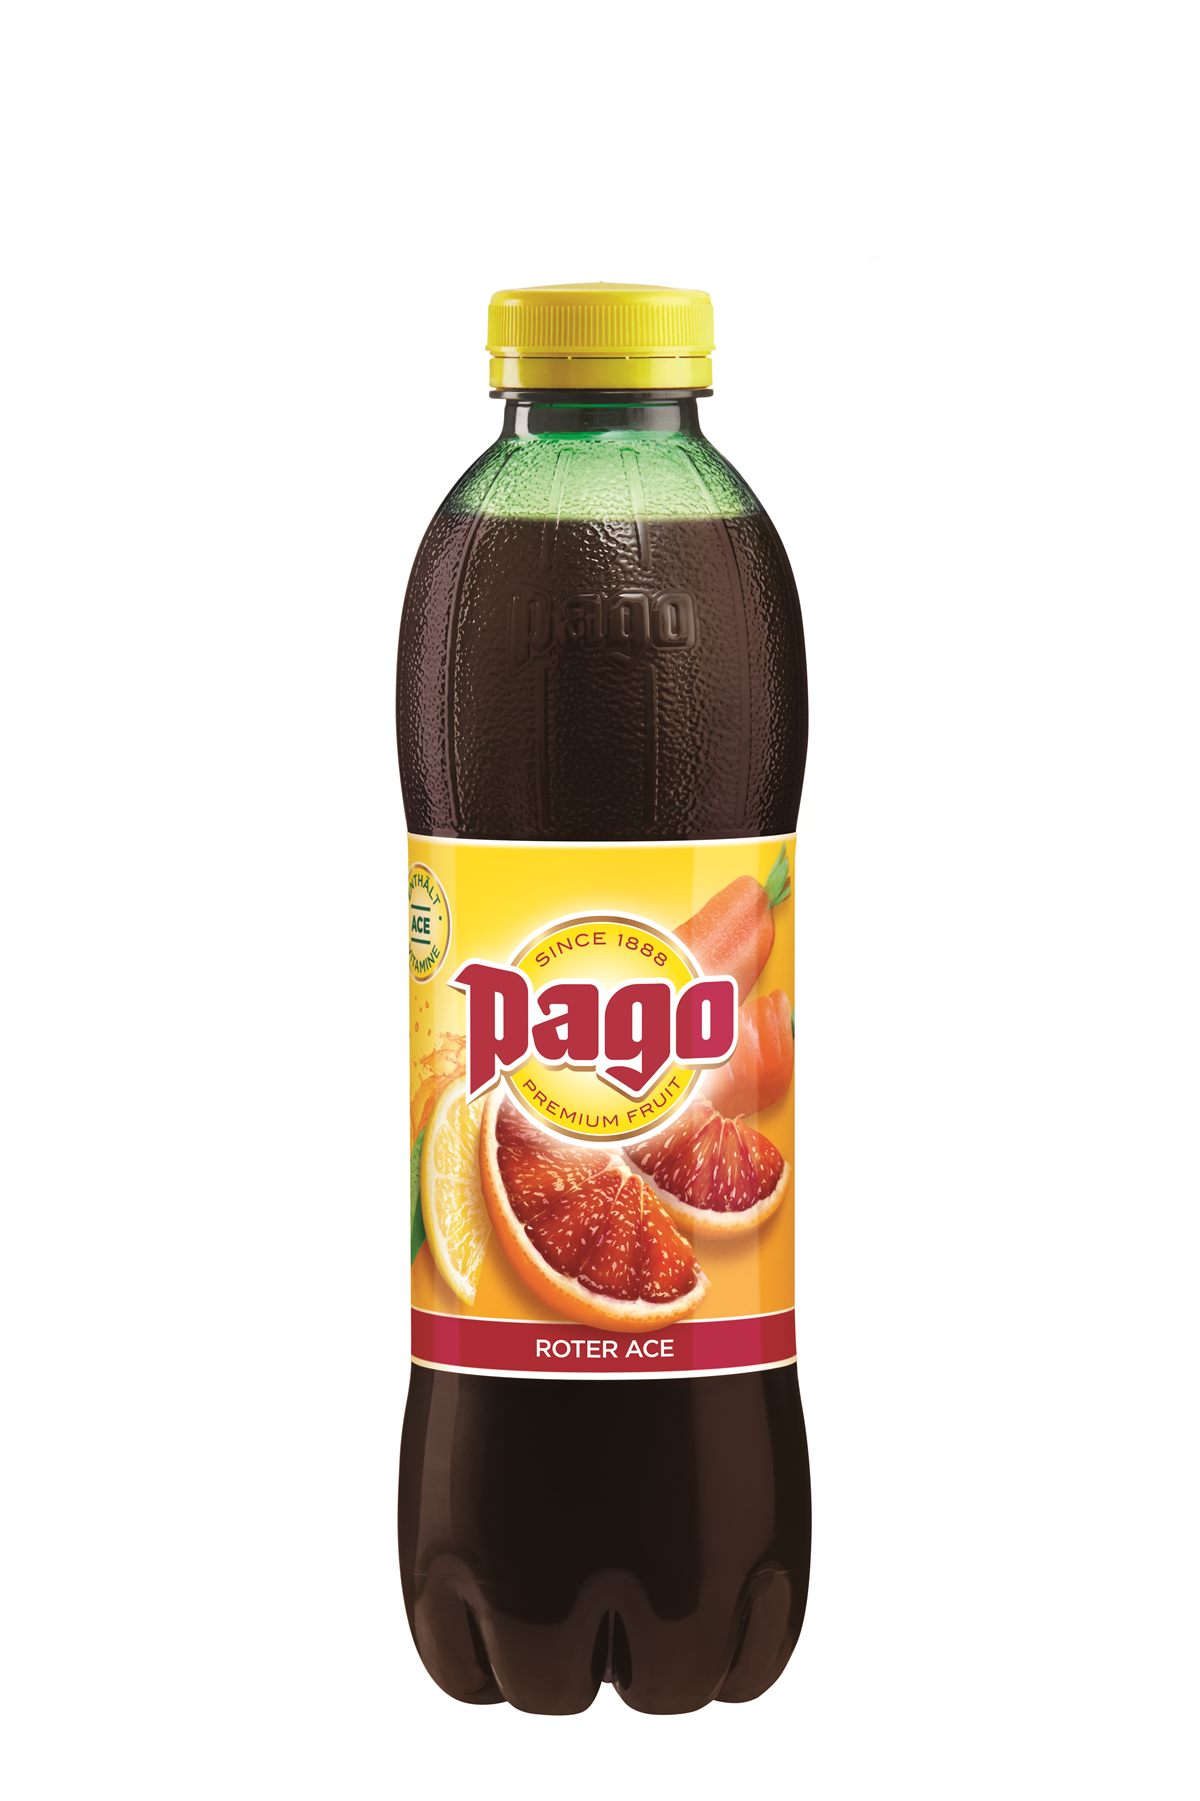 Pago Roter ACE 750ml